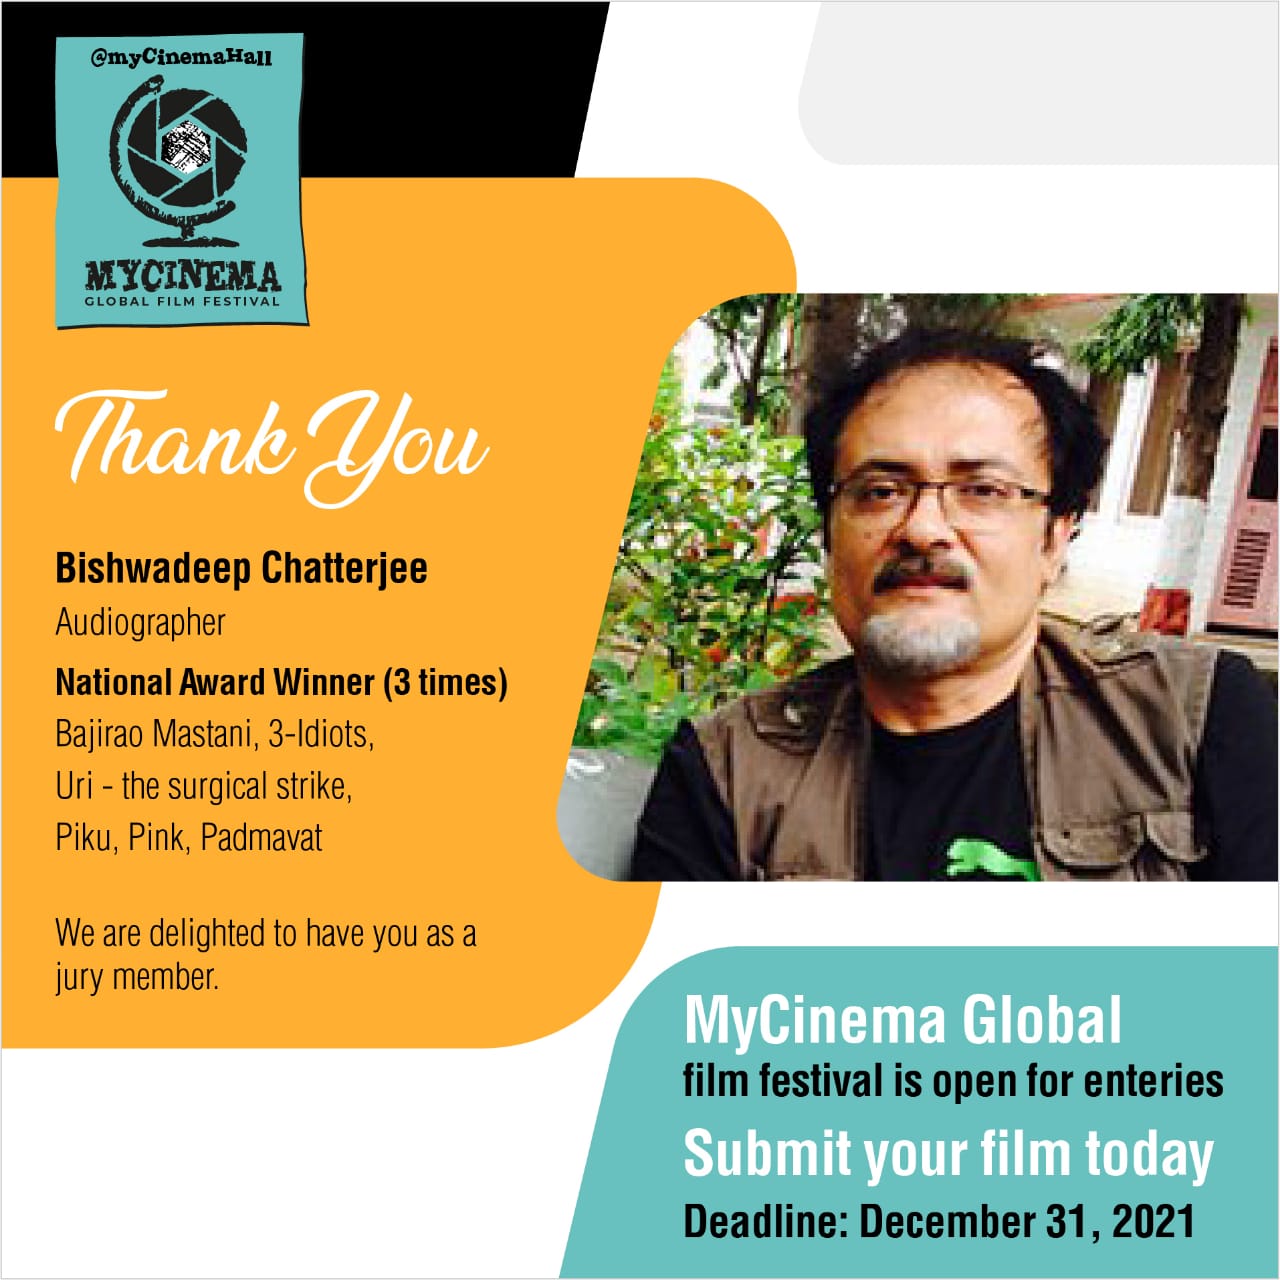 Virtual Film Festival 'My Cinema Global Film Festival' is about to start